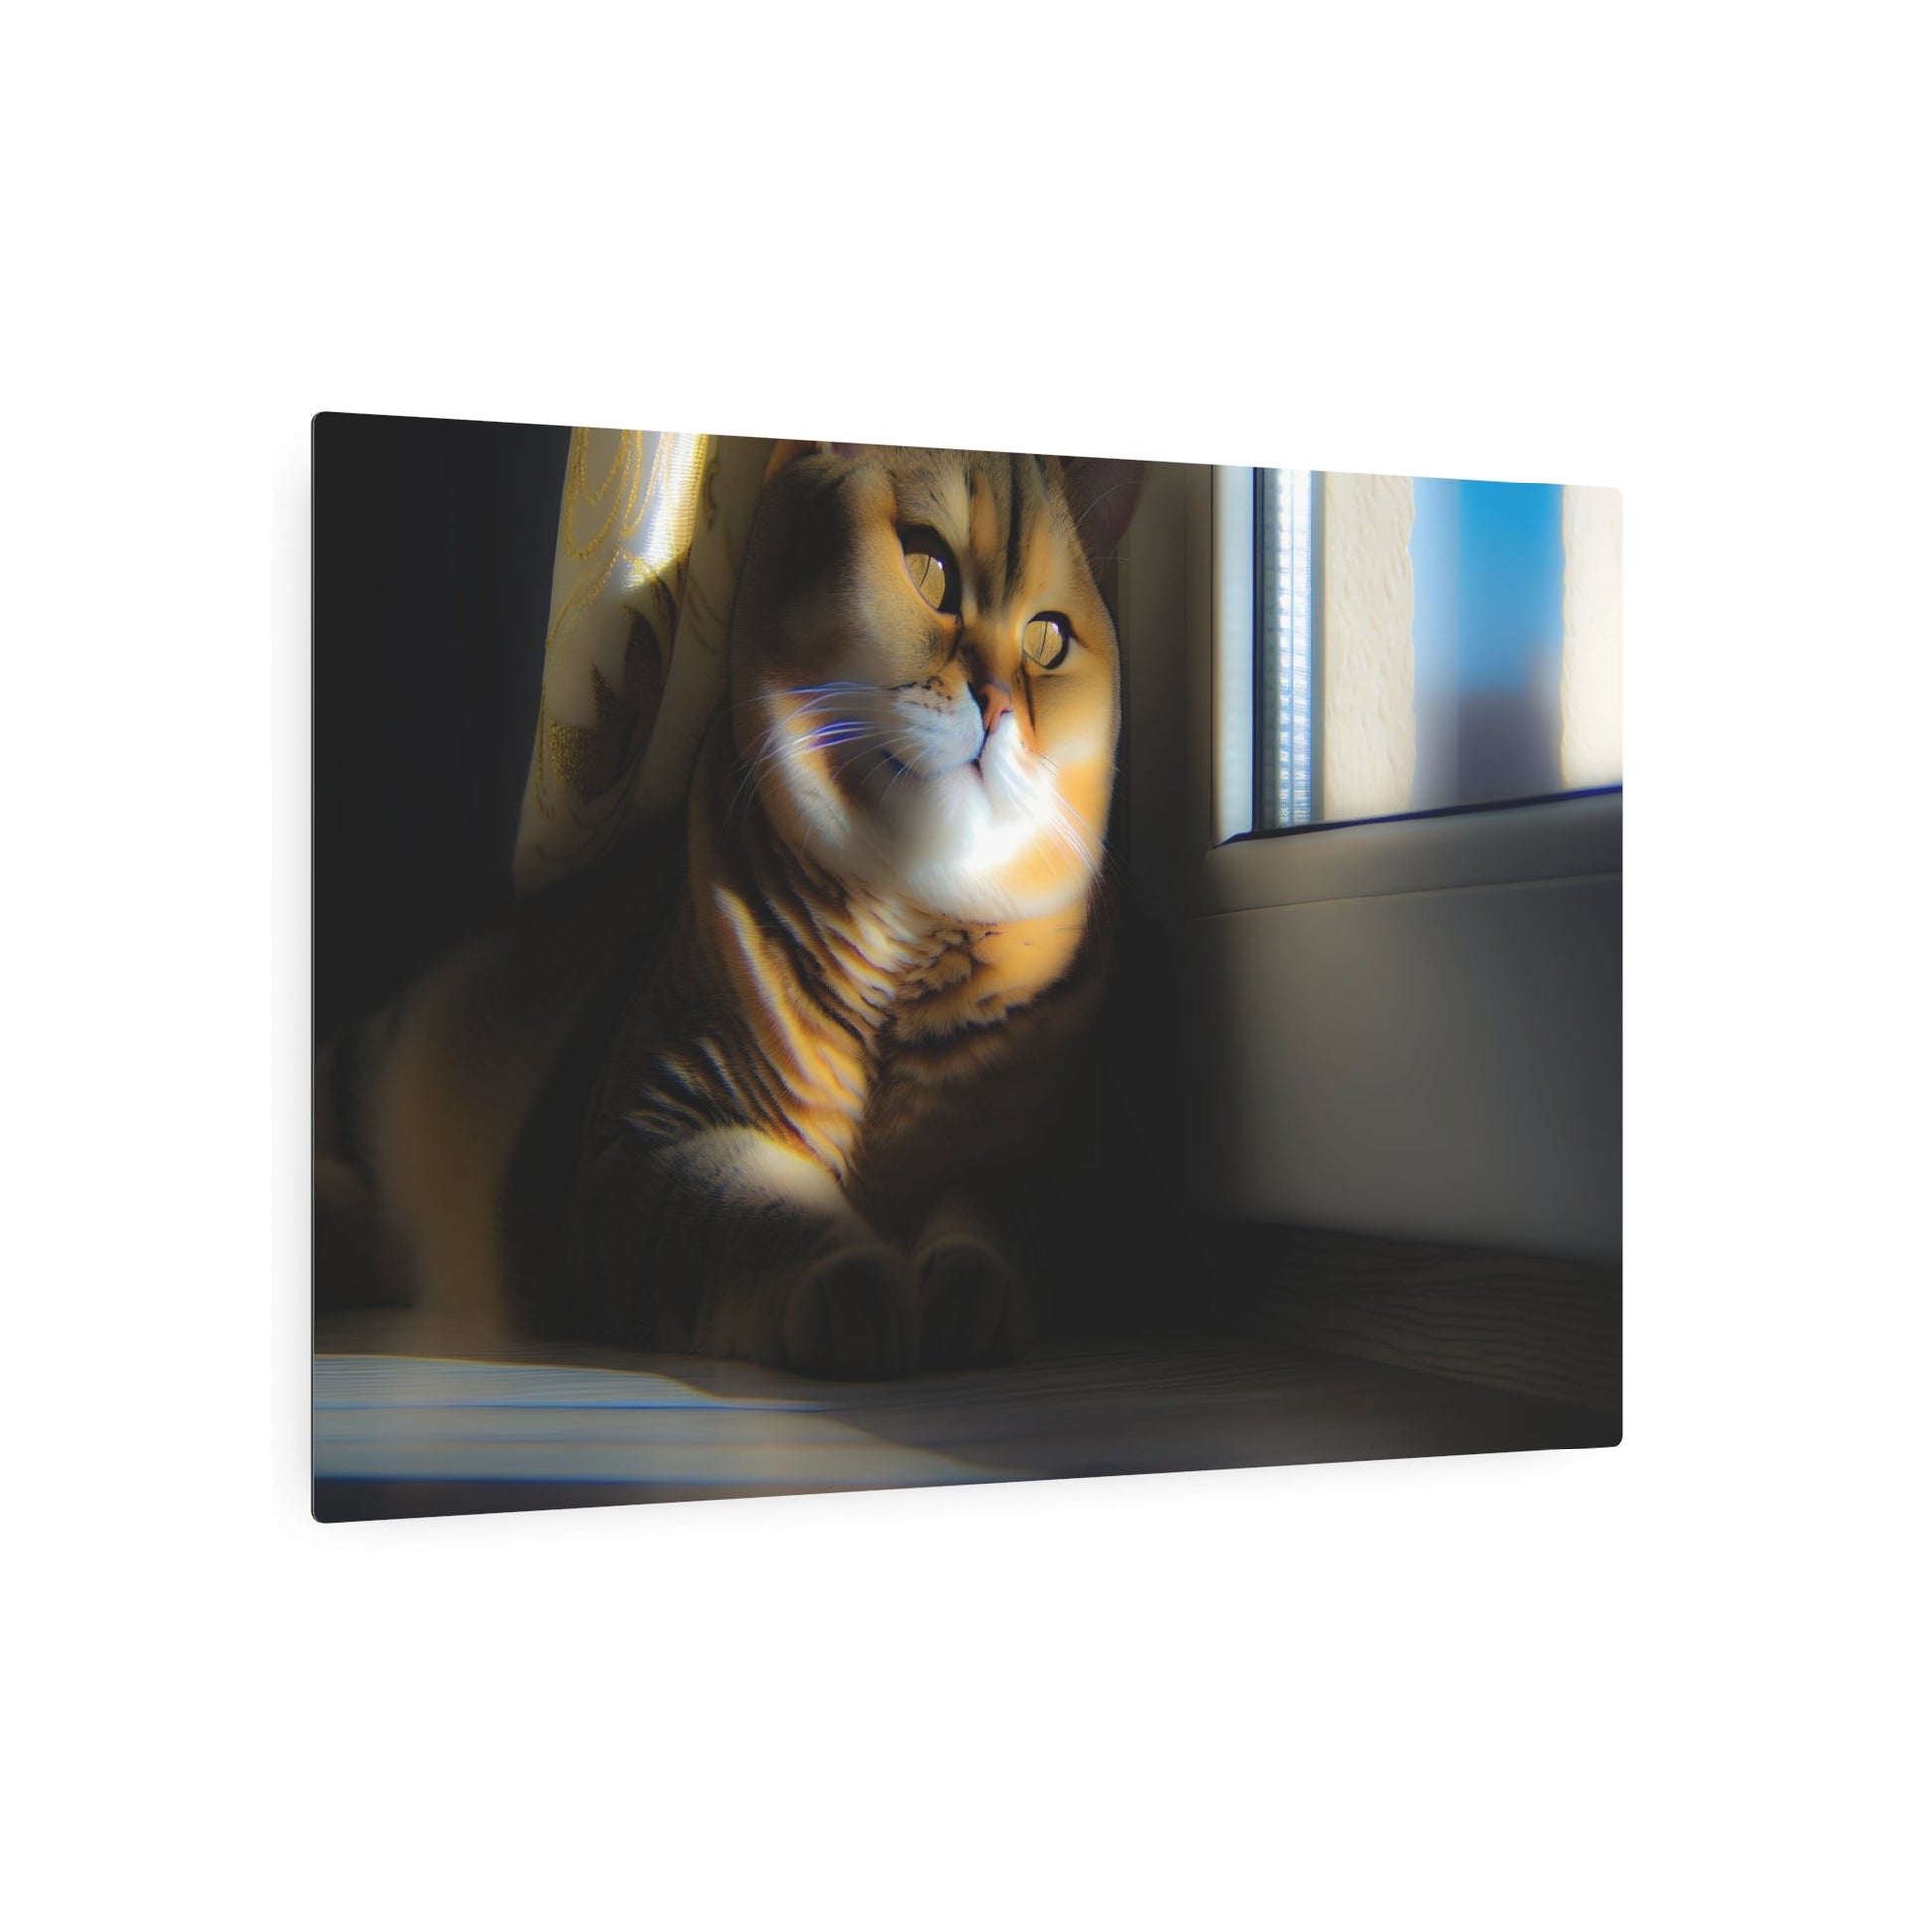 Metal Poster Art | "Realism Art Style - Intricately Detailed Western Art Image of a Cat Lounging in Sunny Window With Sparkling Eyes and Soft Shadows" - Metal Poster Art 36″ x 24″ (Horizontal) 0.12''